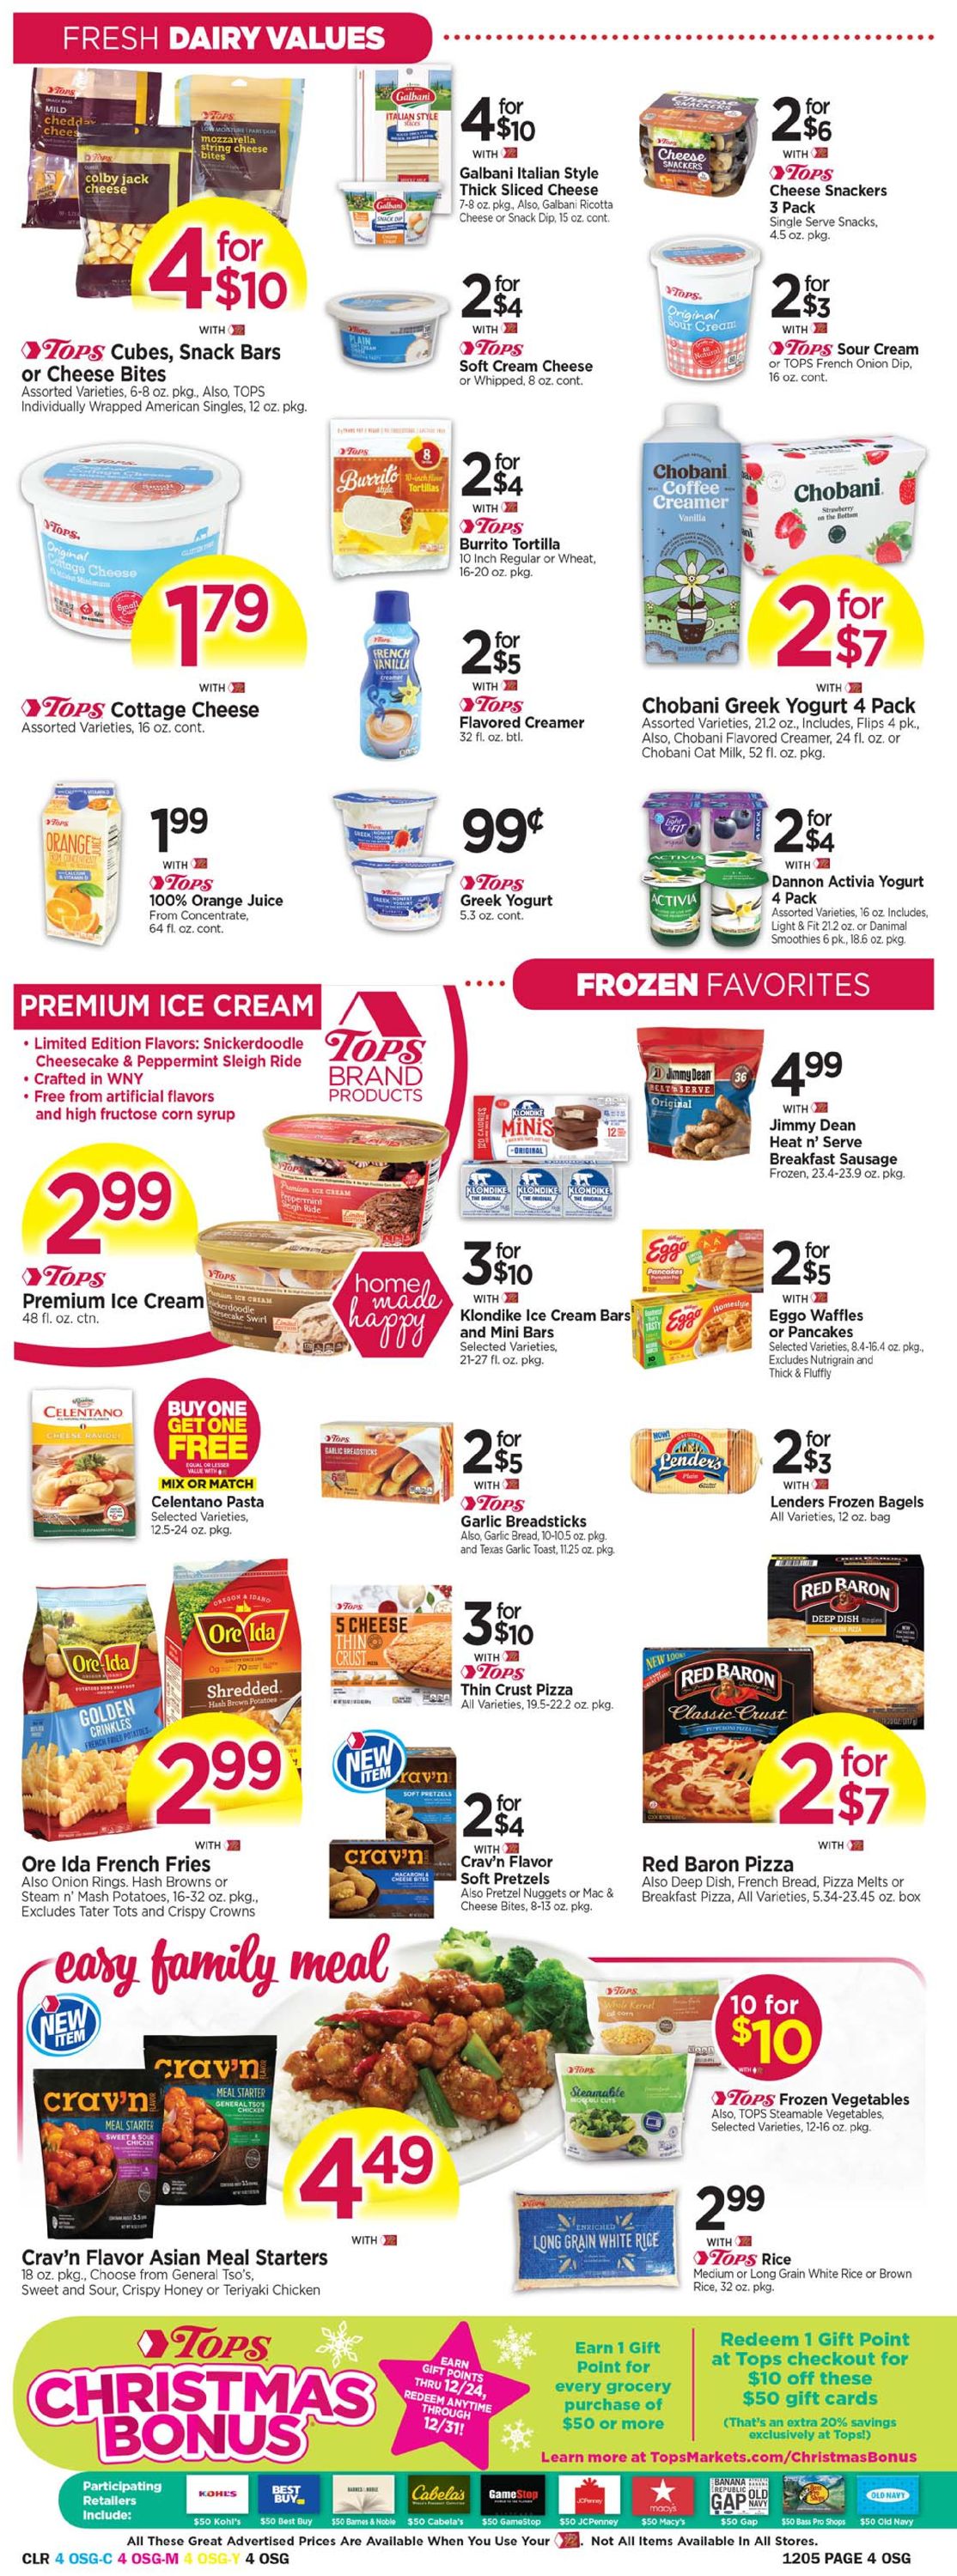 Tops Friendly Markets Cyber Monday 2020 Weekly Ad Circular - valid 11/29-12/05/2020 (Page 4)